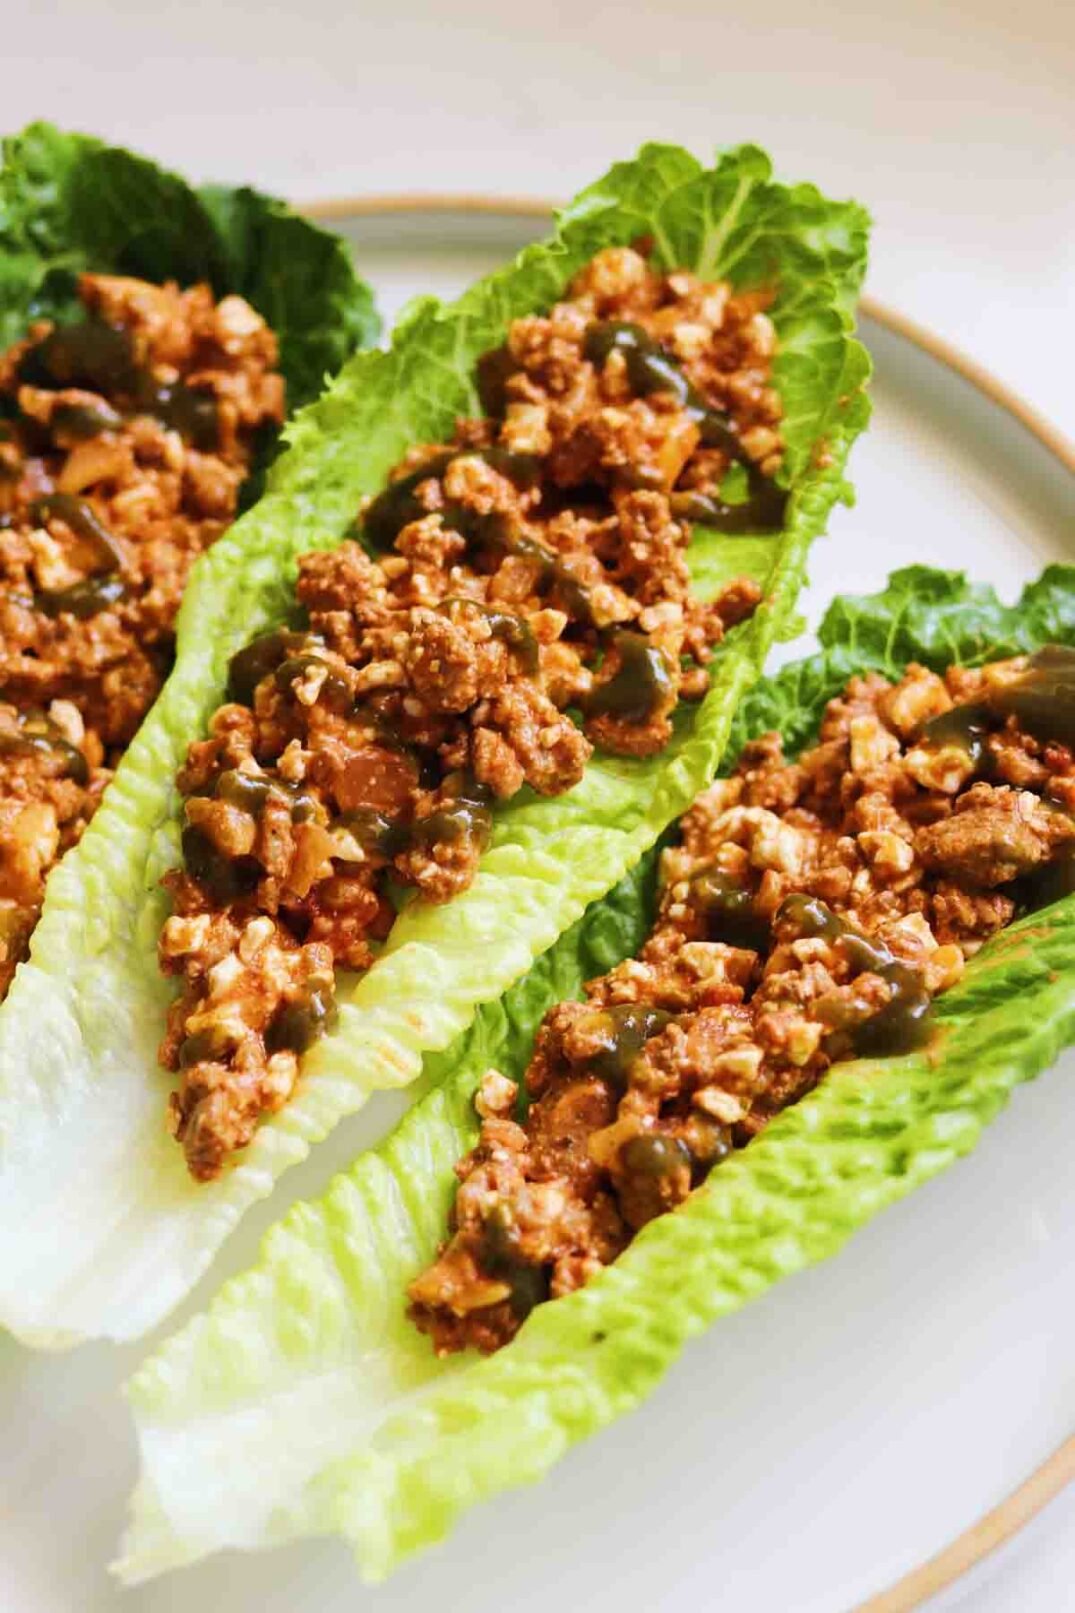 cottage cheese taco meat in a lettuce wrap in a white plate.